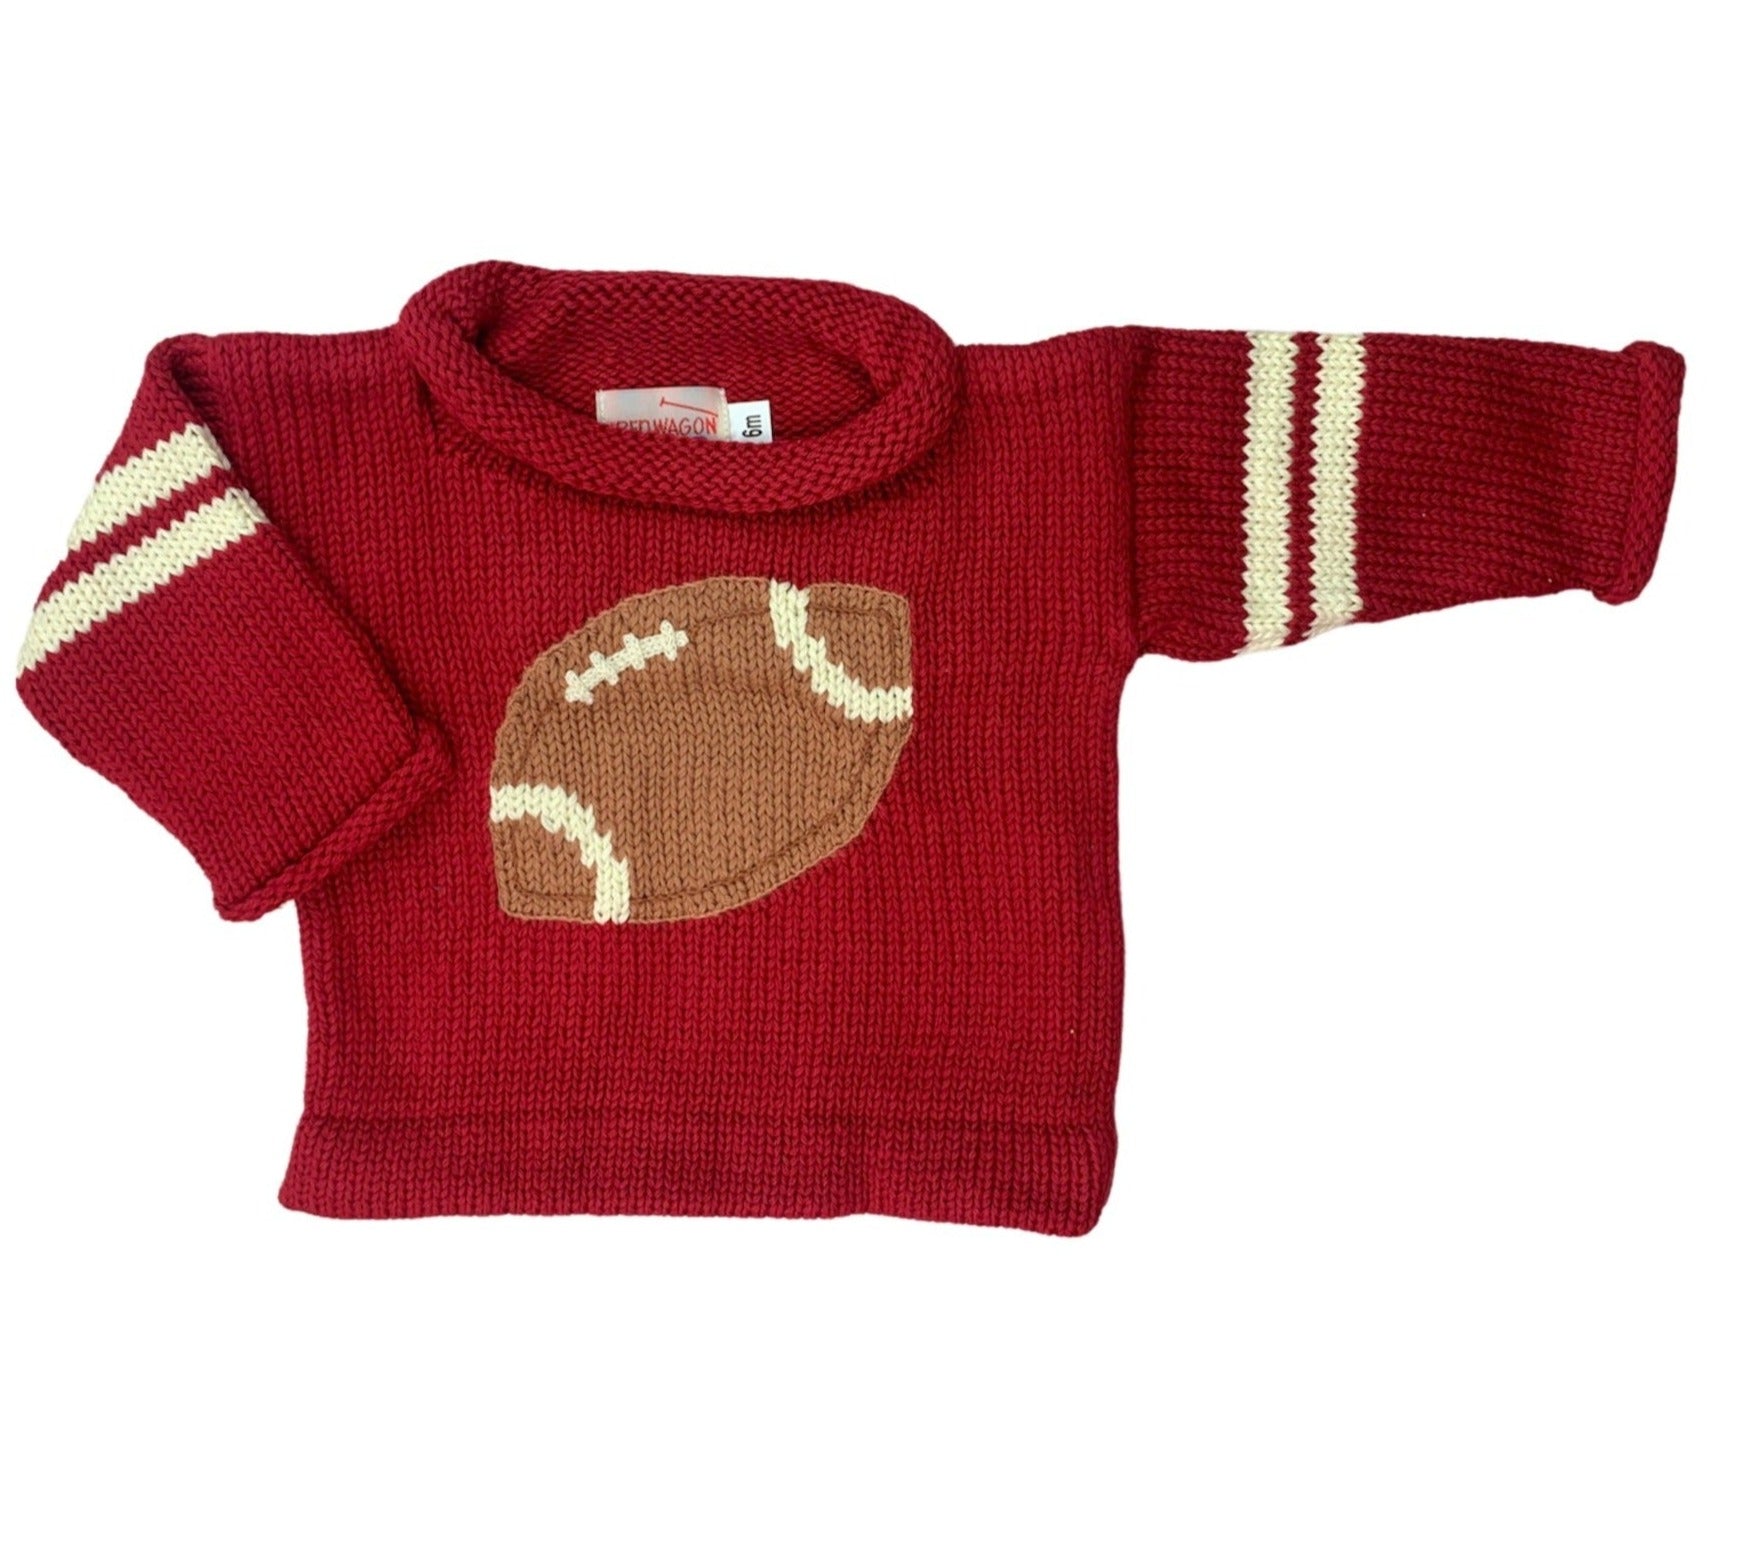 red sweater with 2 ivory stripes on each sleeve and brown football in the center